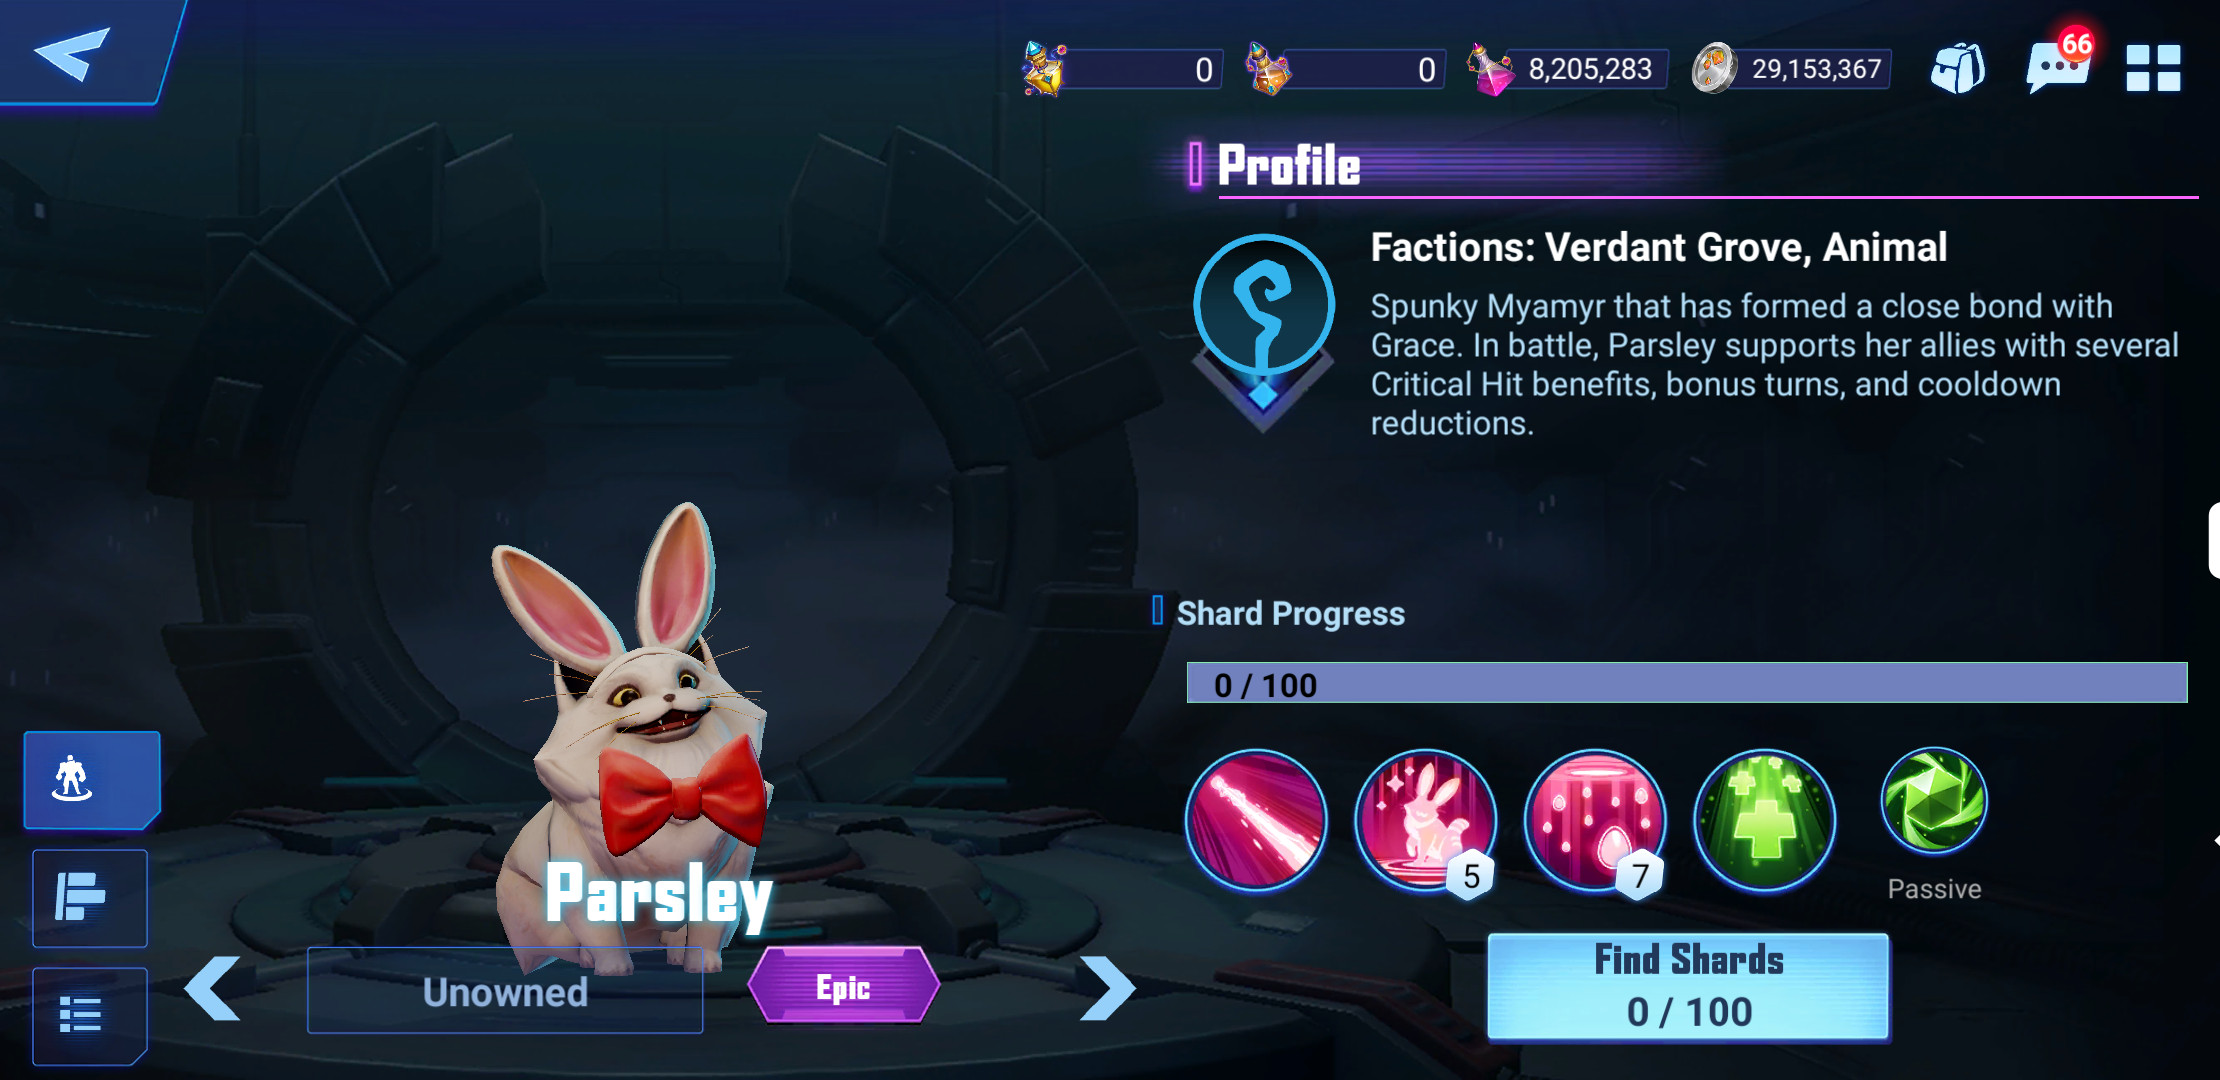 Parsley in-game character profile